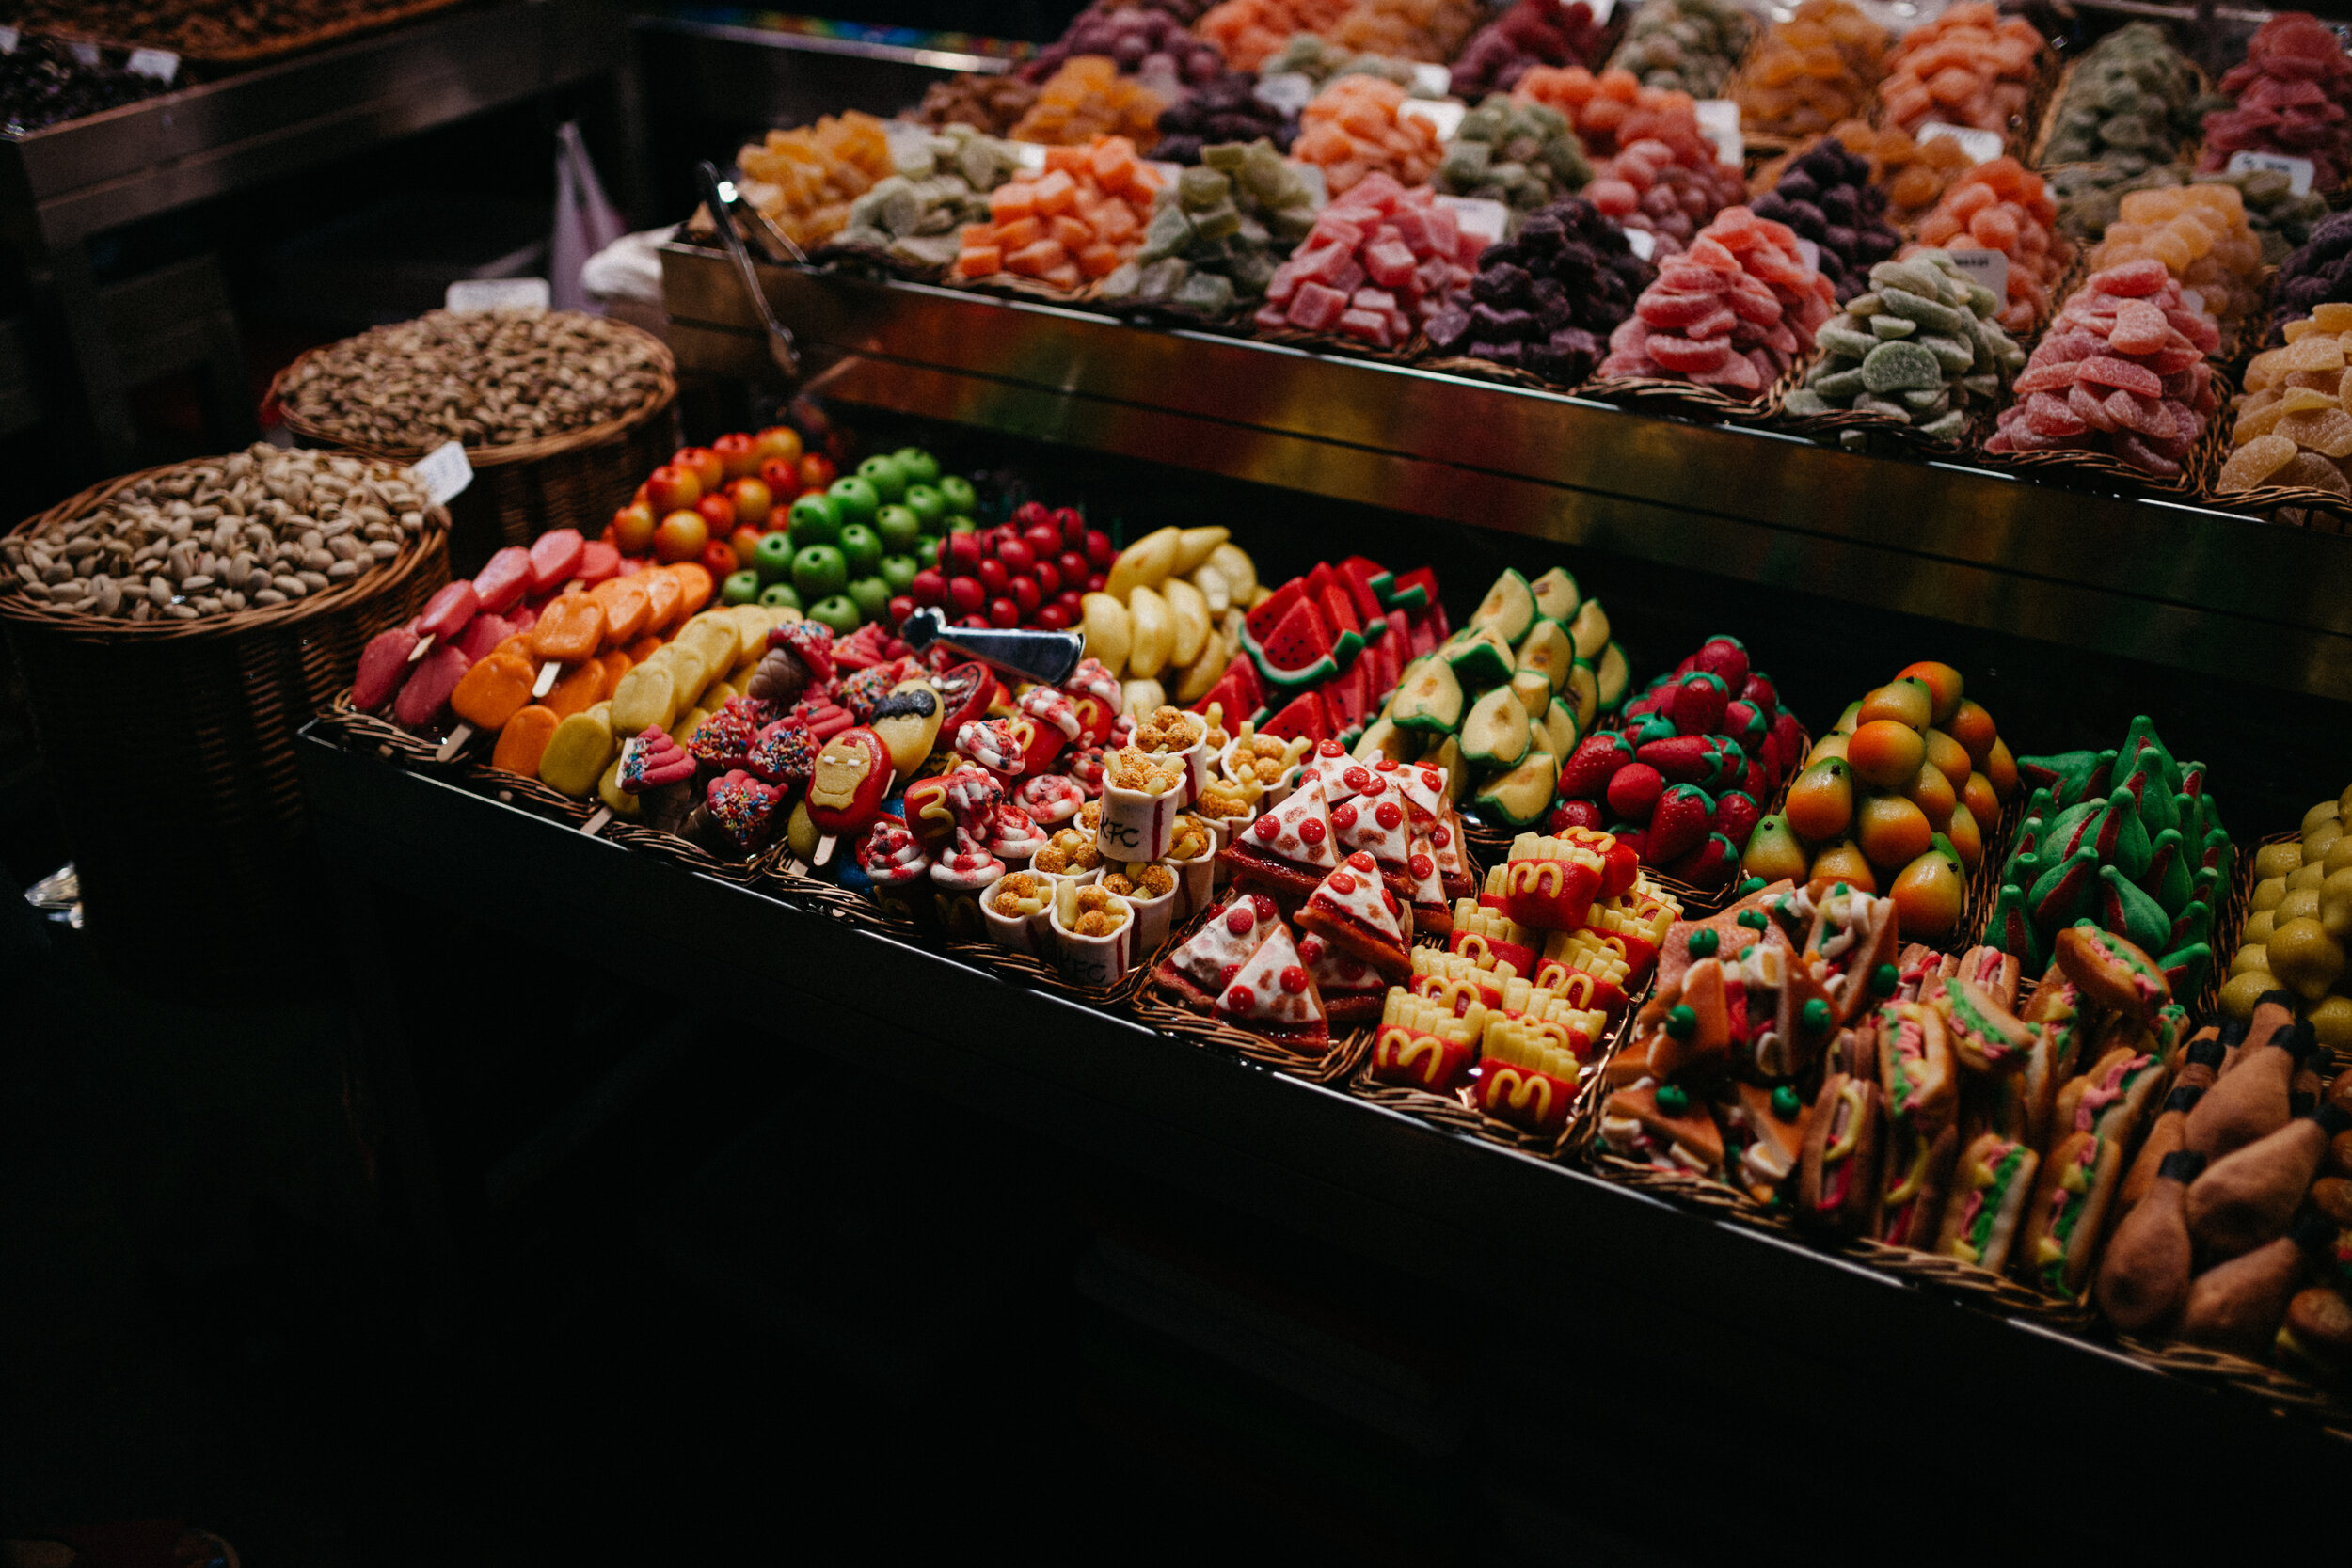  Shop for groceries or pick up food to go at the famous La Boqueria, a market dating back to the 1200’s. You’ll find fresh fruit and veg, fish and seafood, butcher, charcuterie, fresh pressed juices, sandwiches and prepared foods, sweets, and much mo